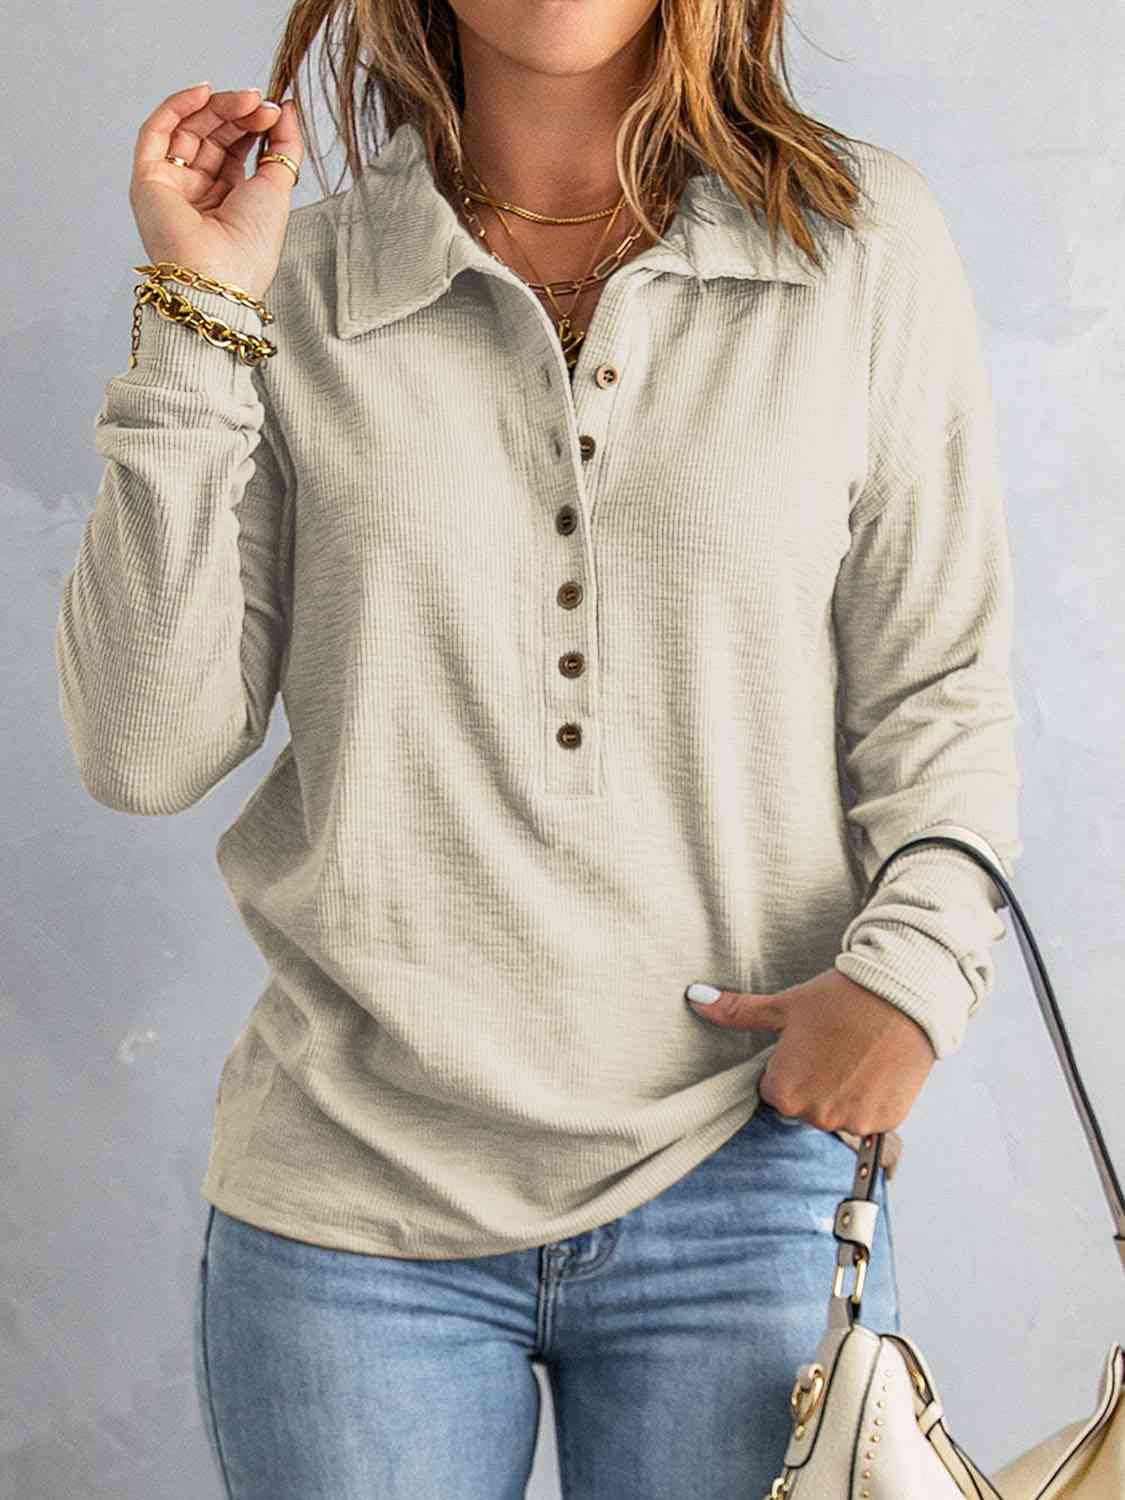 Cassie Collared Neck Half Button Top- 1 Large/Heather Gray left! FINAL SALE!